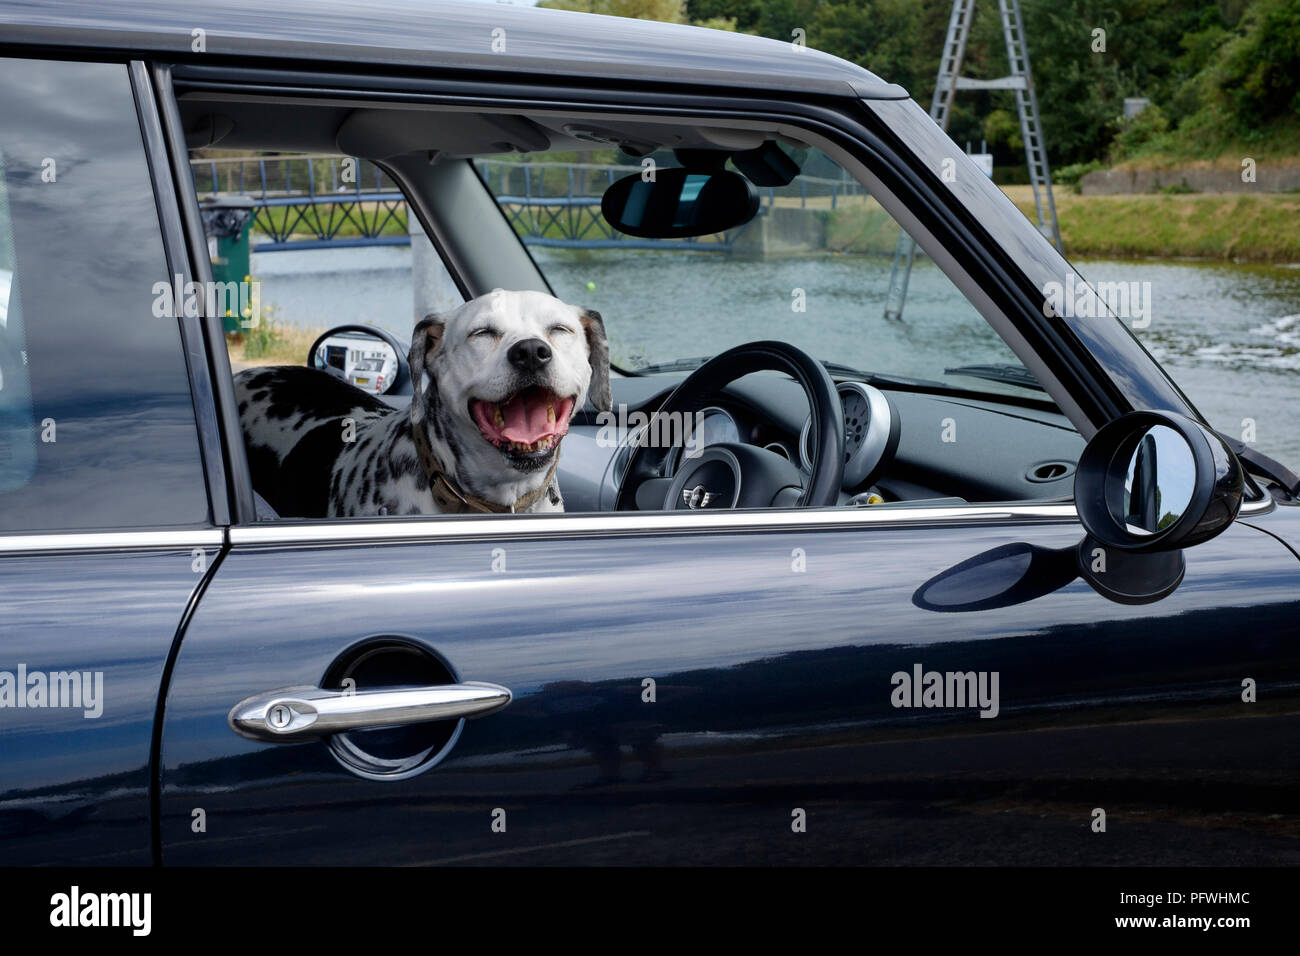 dalmation dog sitting in the front seat of a black mini car england uk Stock Photo